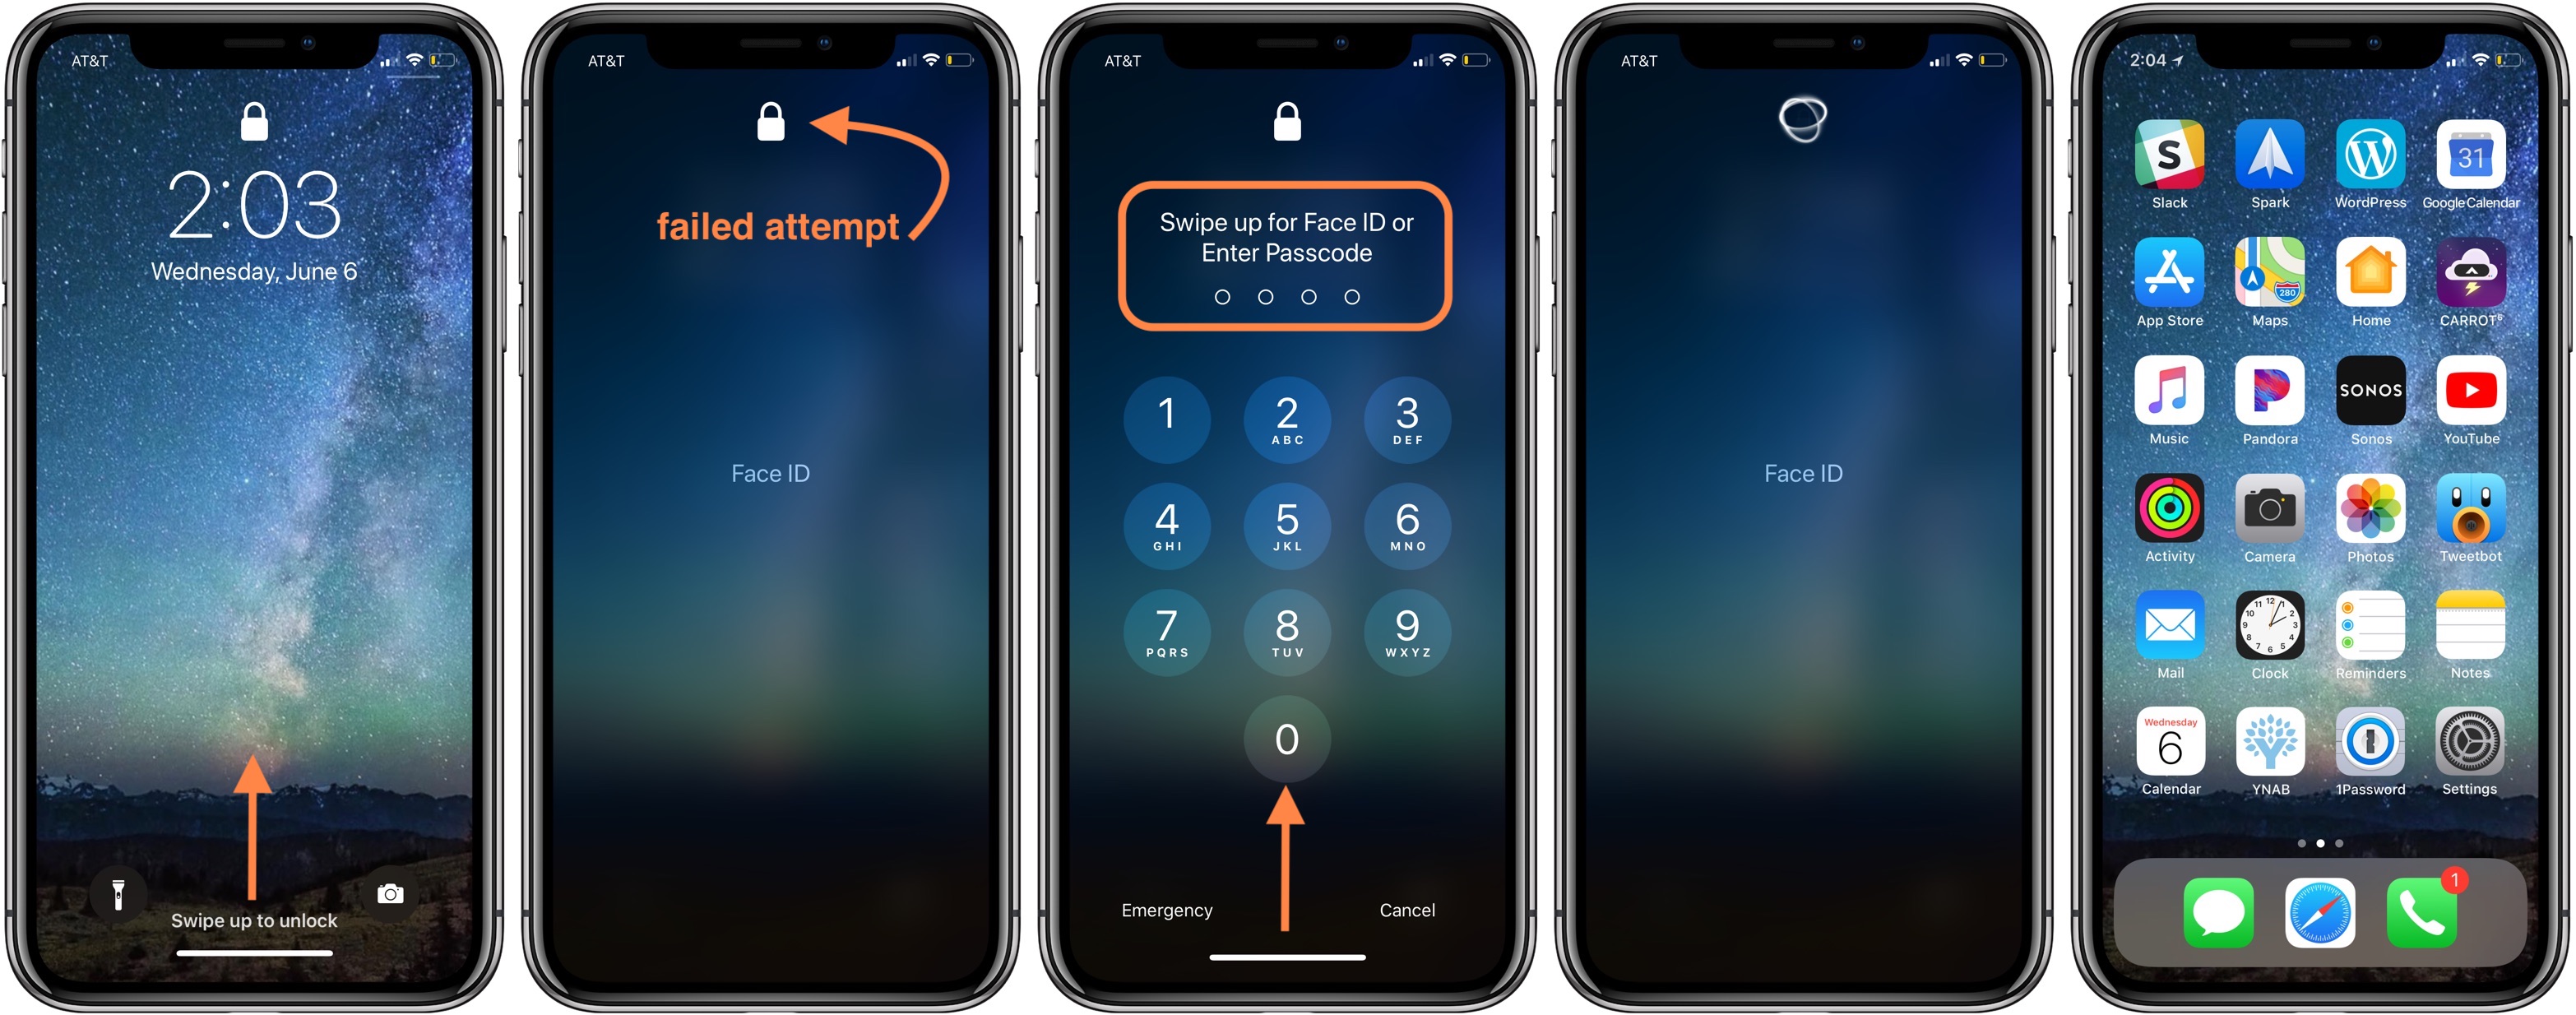 How many attempts to unlock iPhone with Face ID?